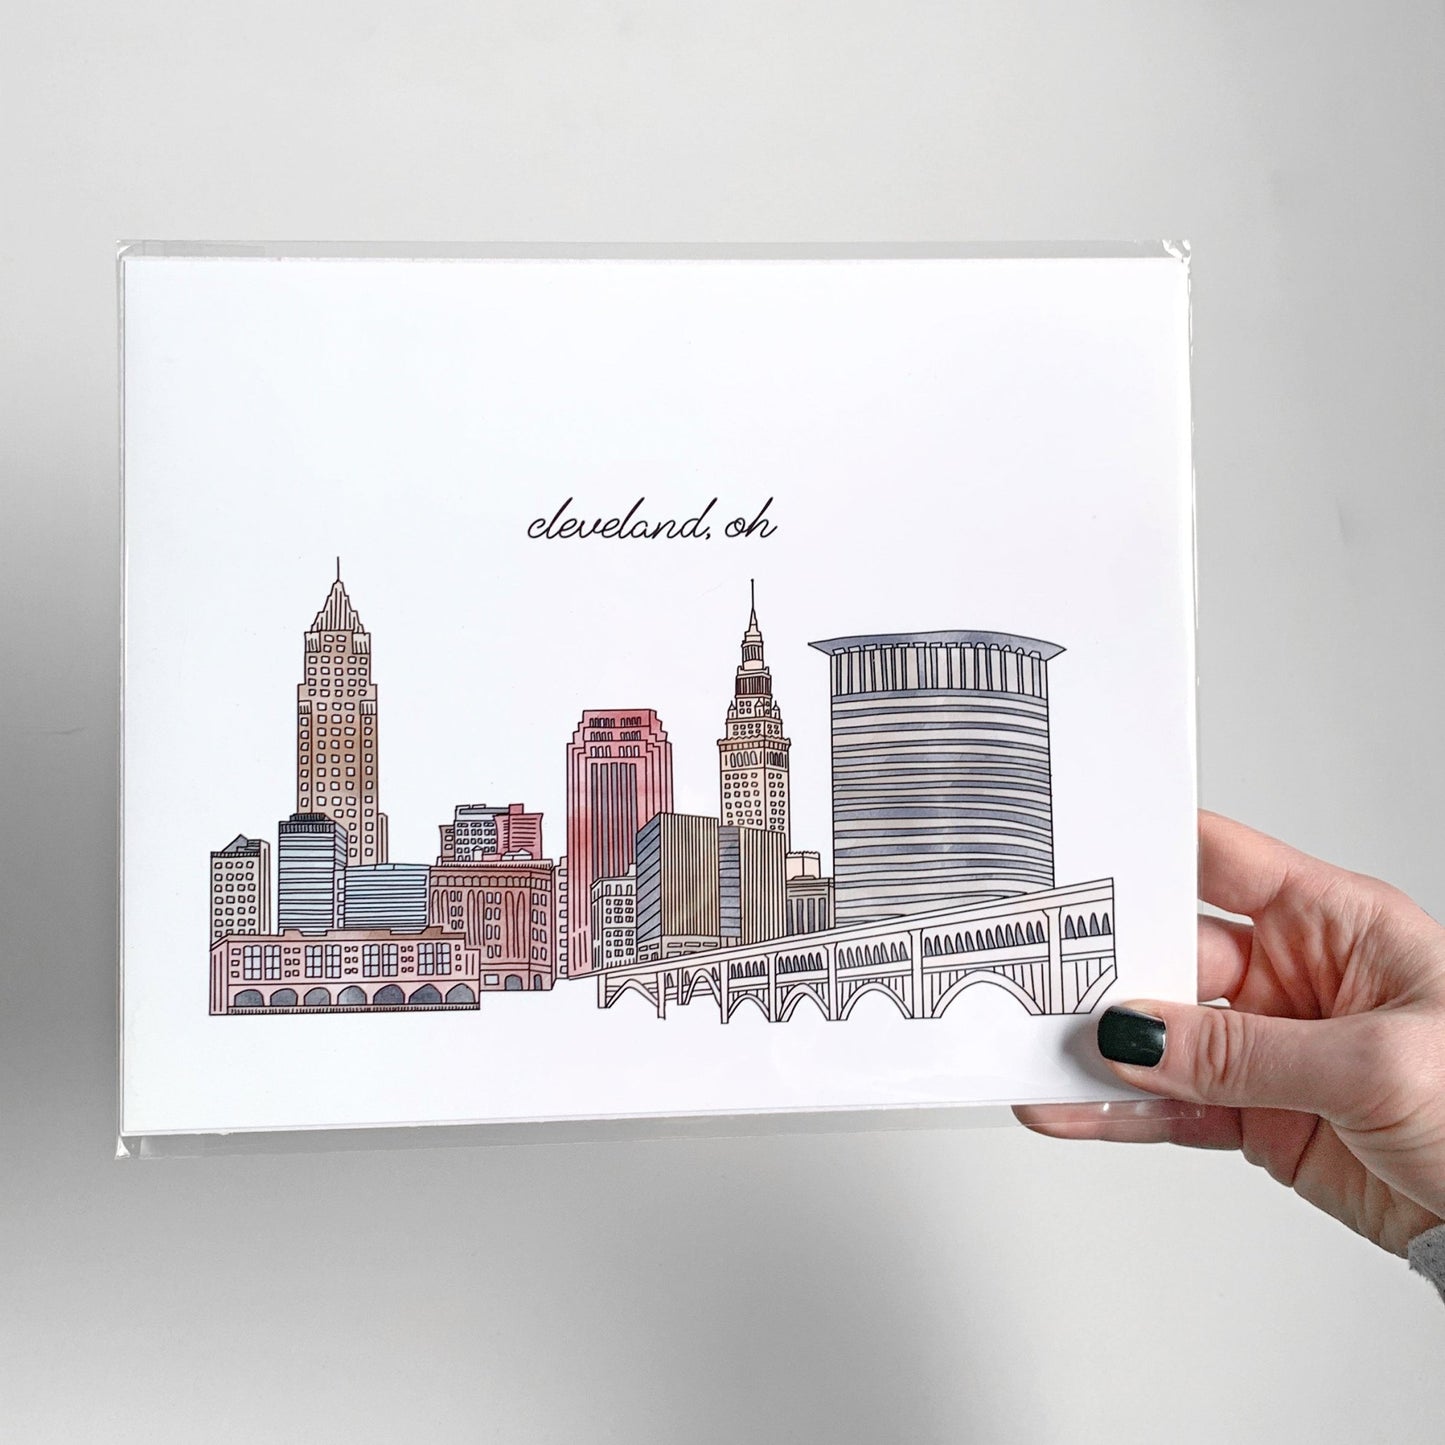 An example of a cityscape drawing on a print inside a plastic sleeve